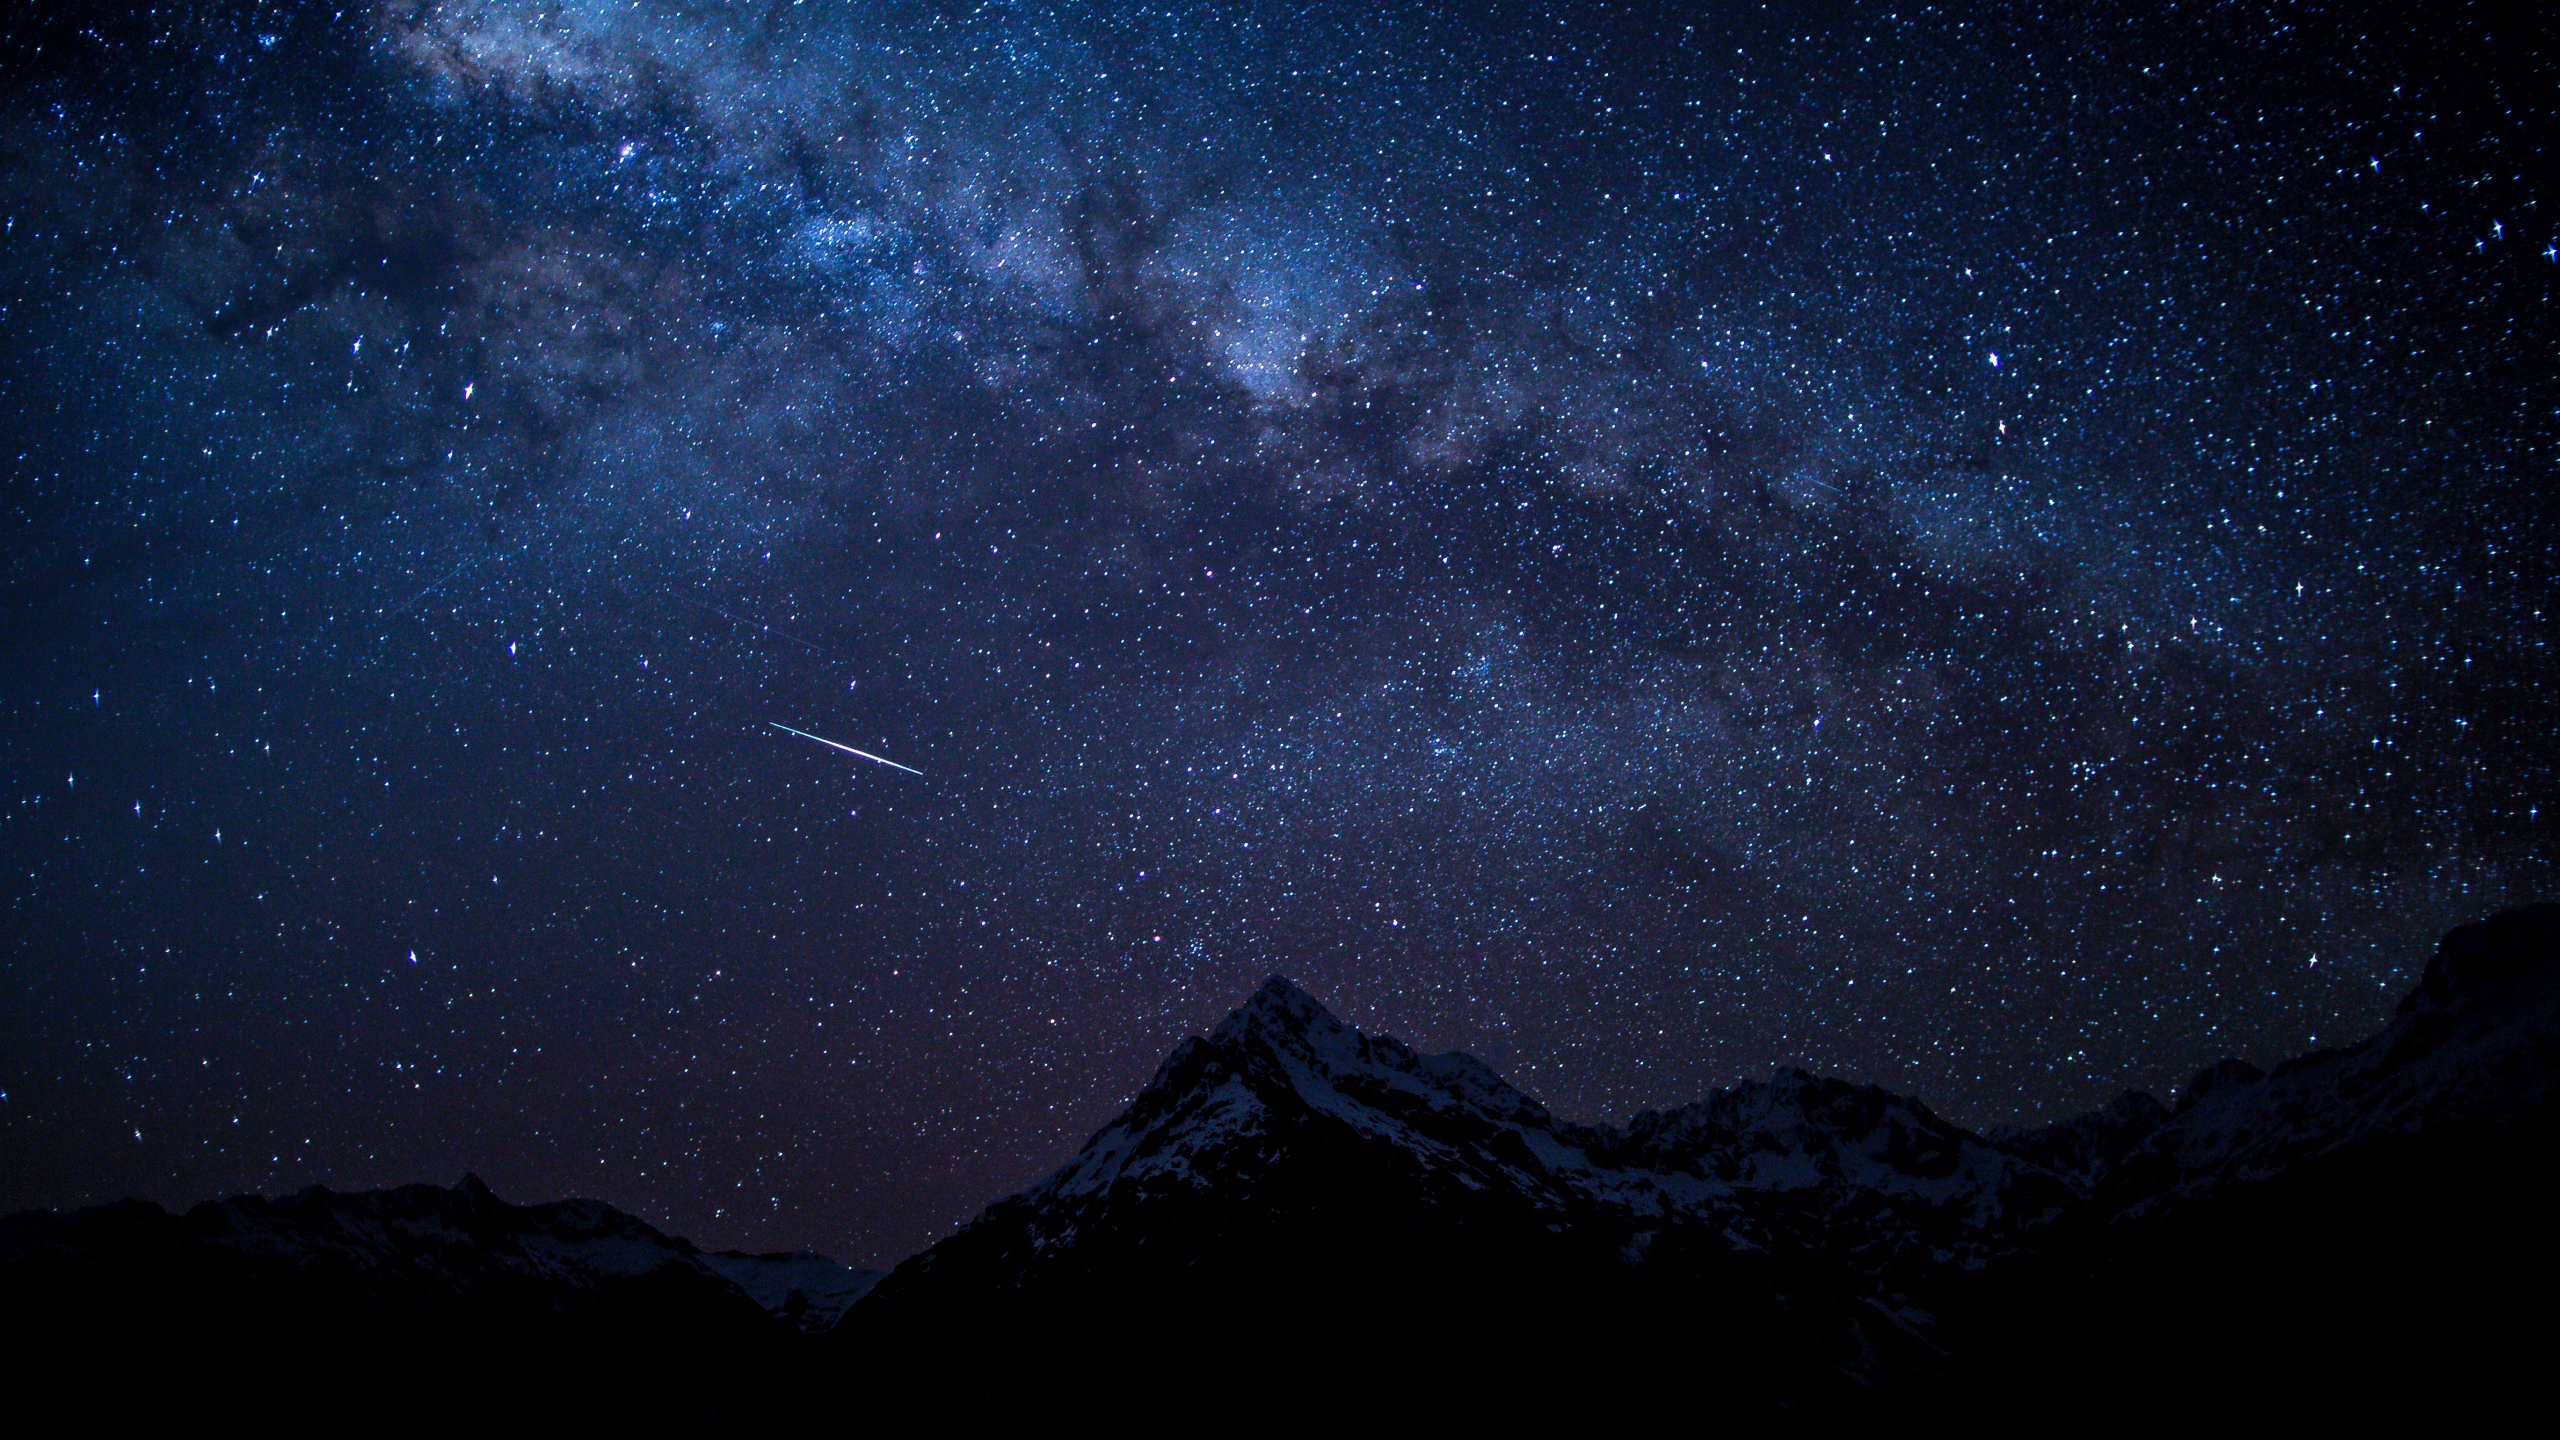 Download 2560x1440 Wallpaper Starry Sky Night Mountains Nature Dual Wide Widescreen 16 9 Widescreen 2560x1440 Hd Image Background 678